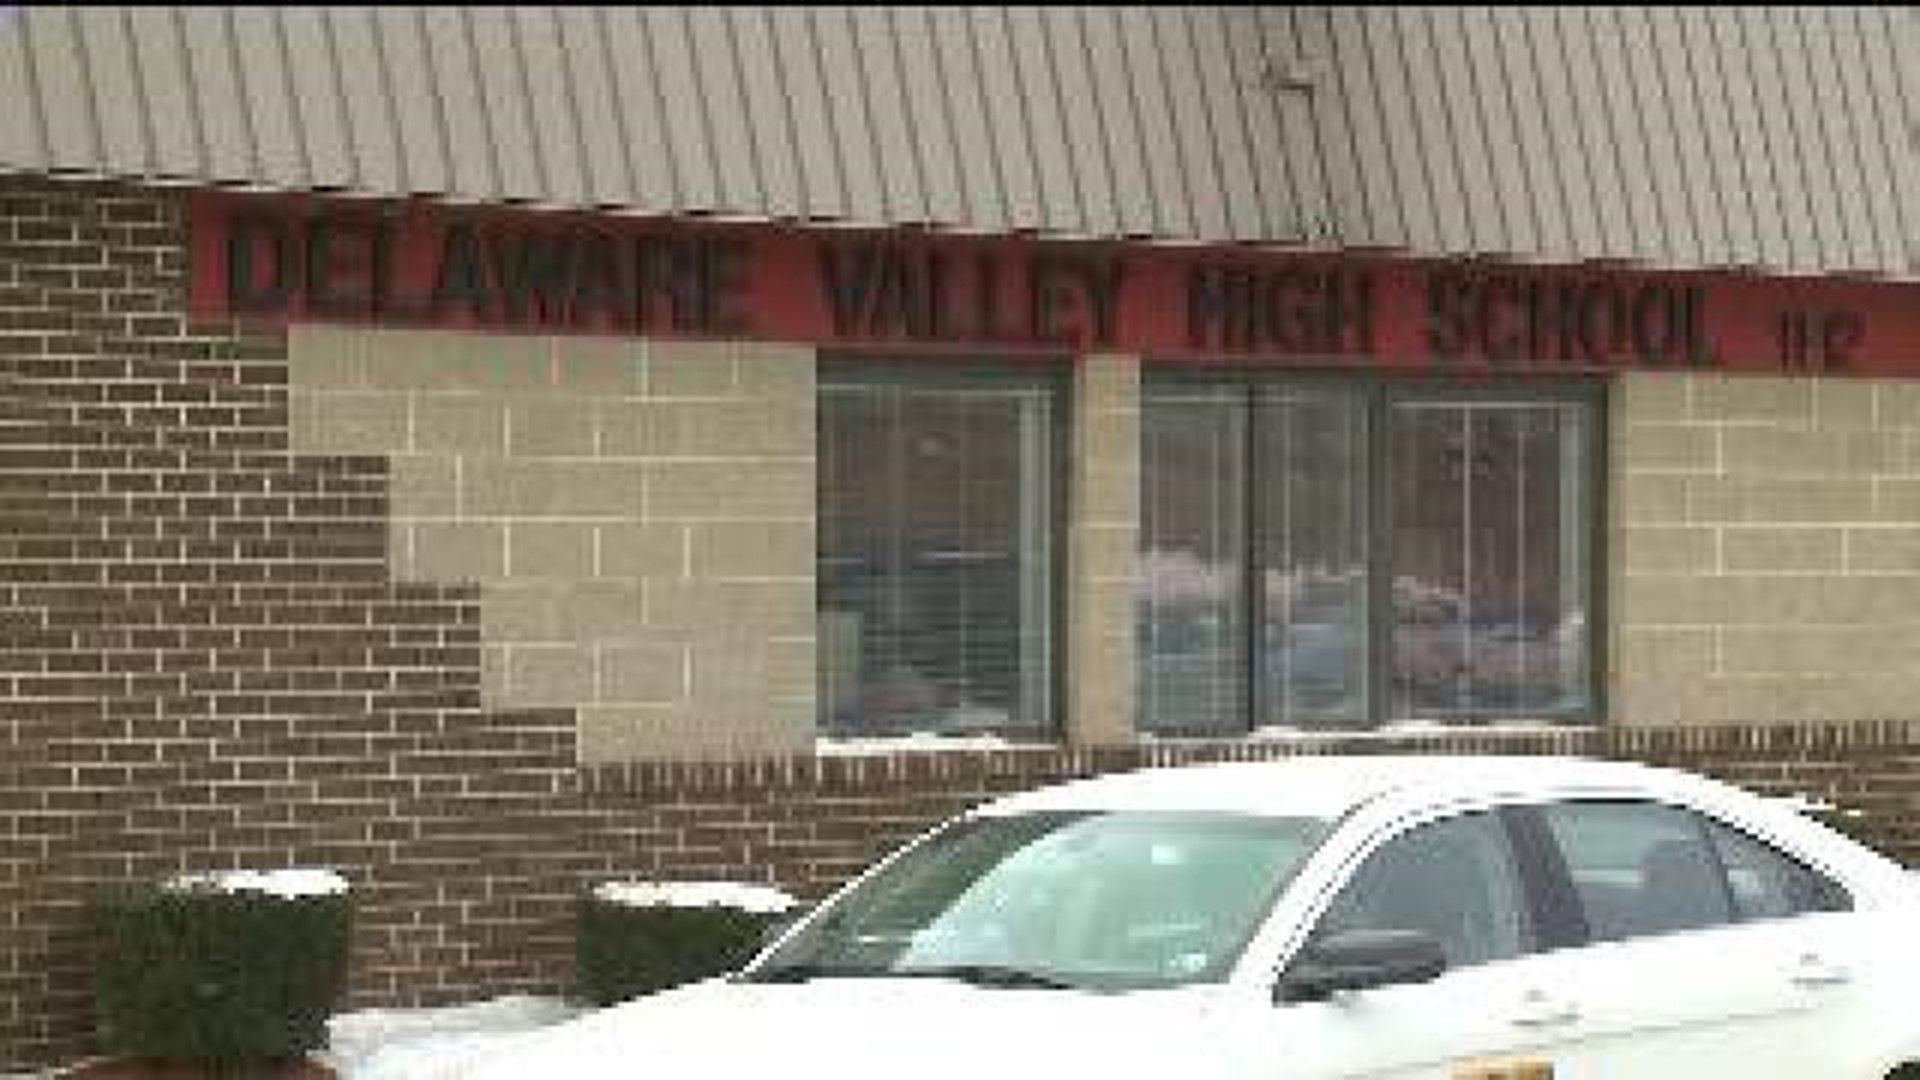 Drug Testing Coming Back to Delaware Valley Schools